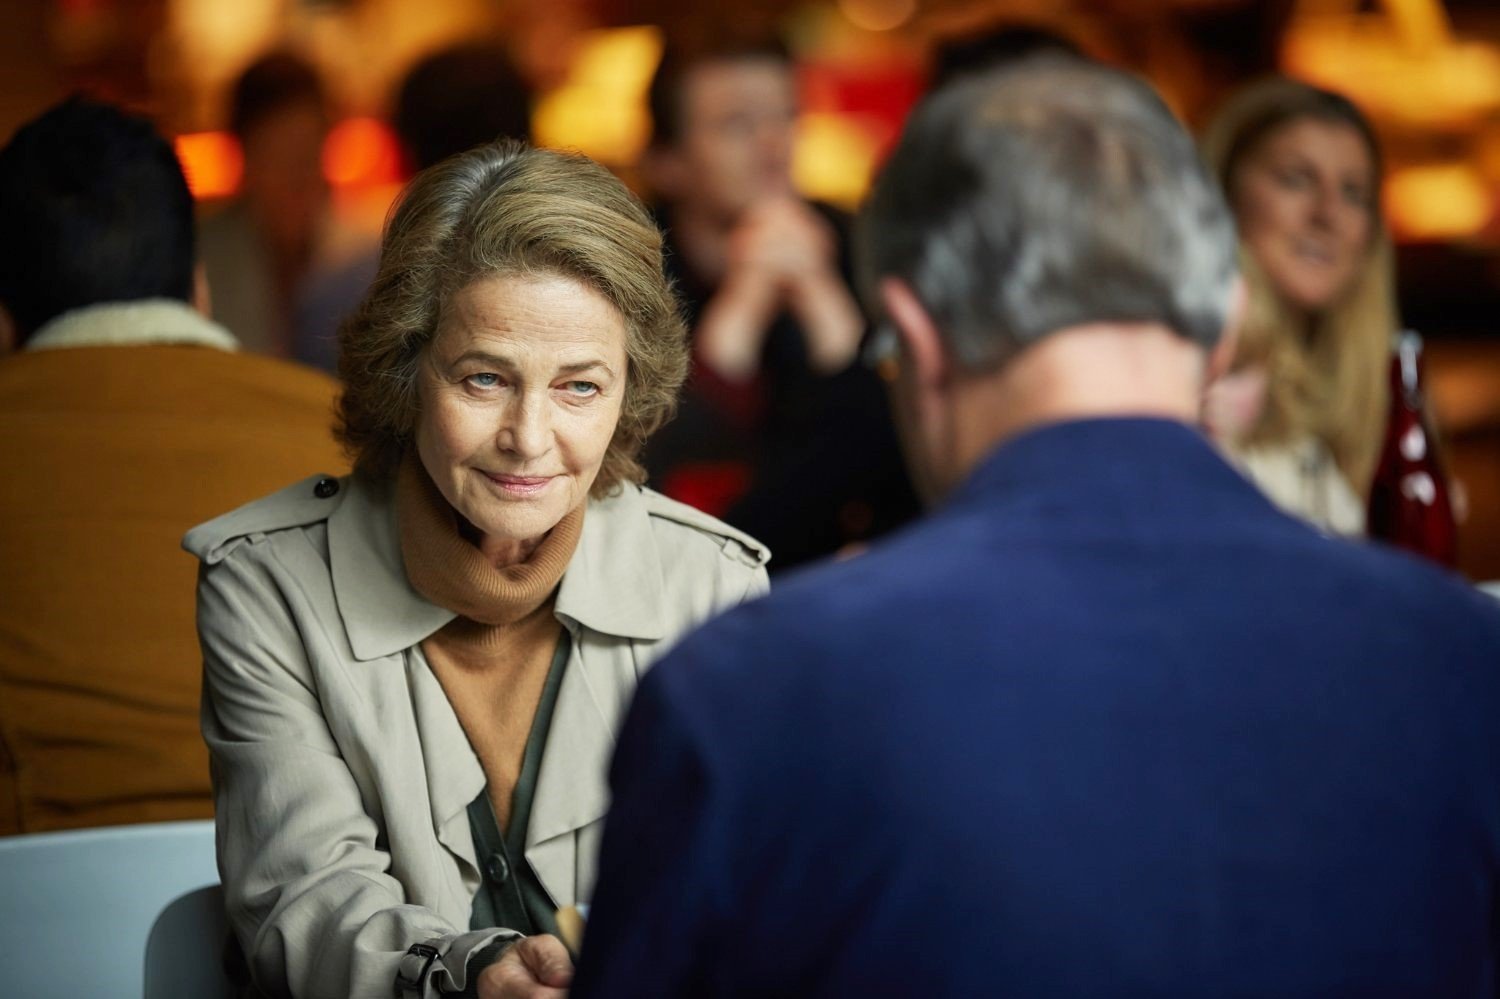 Charlotte Rampling stars as Veronica Ford in CBS Films' The Sense of an Ending (2017)